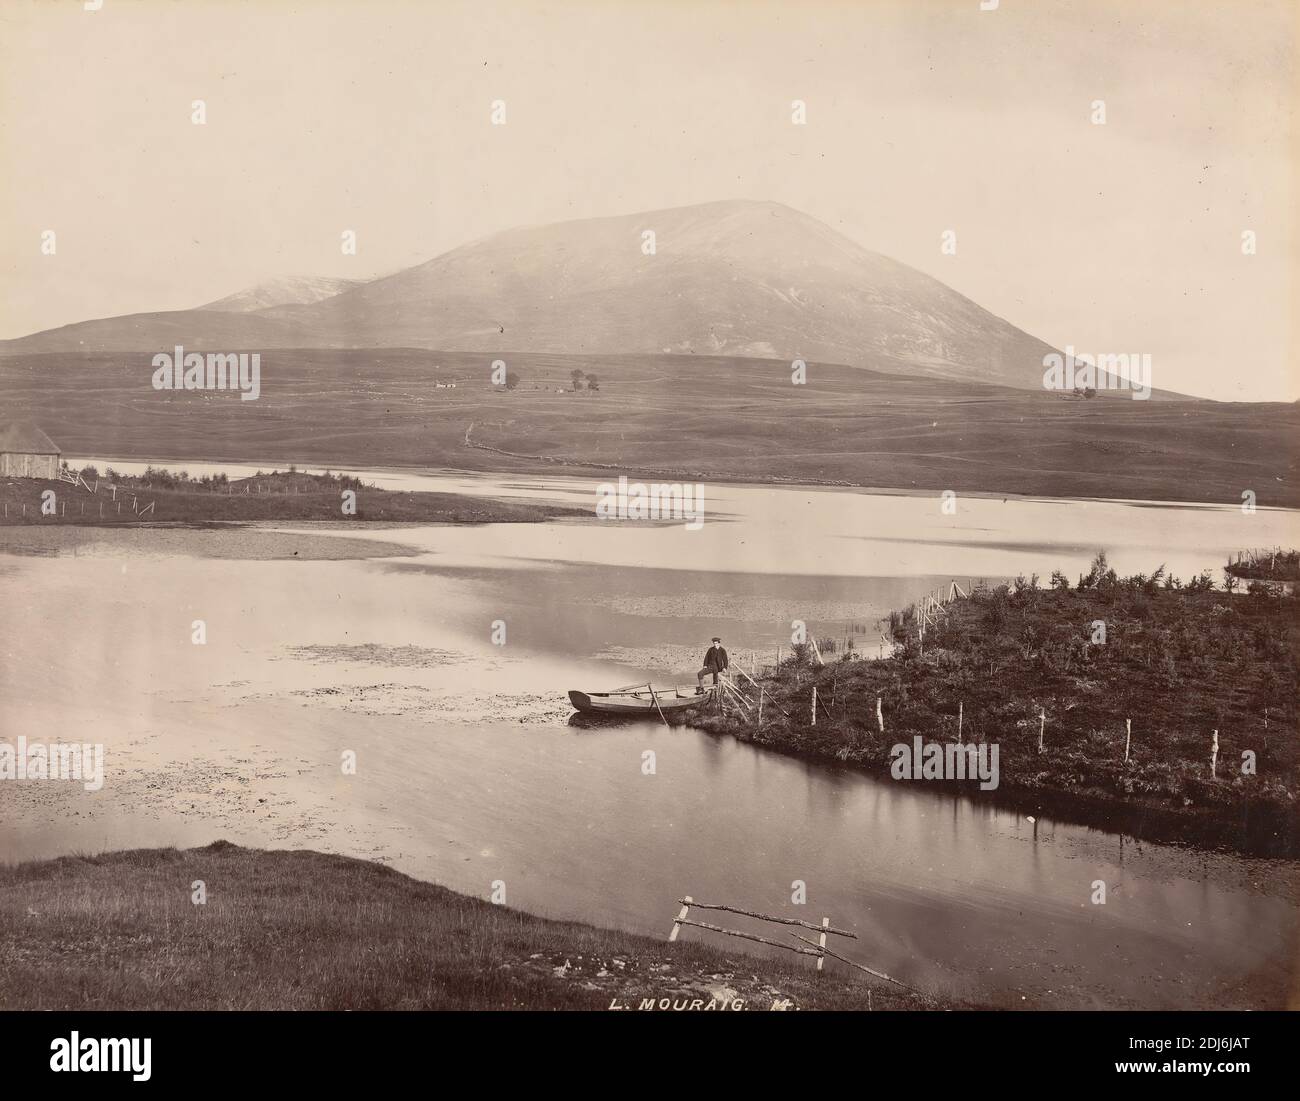 Loch Mouraig, James Valentine, 1815–1879, British, 1860s, Albumen print from wet collodion negative on thin, smooth, cream wove paper, Sheet: 7 1/4 × 9 3/8 inches (18.4 × 23.8 cm) and Mount: 13 × 16 5/8 inches (33 × 42.2 cm), boat, hill, lake, landscape, Kinross, Perth, Scotland, United Kingdom Stock Photo